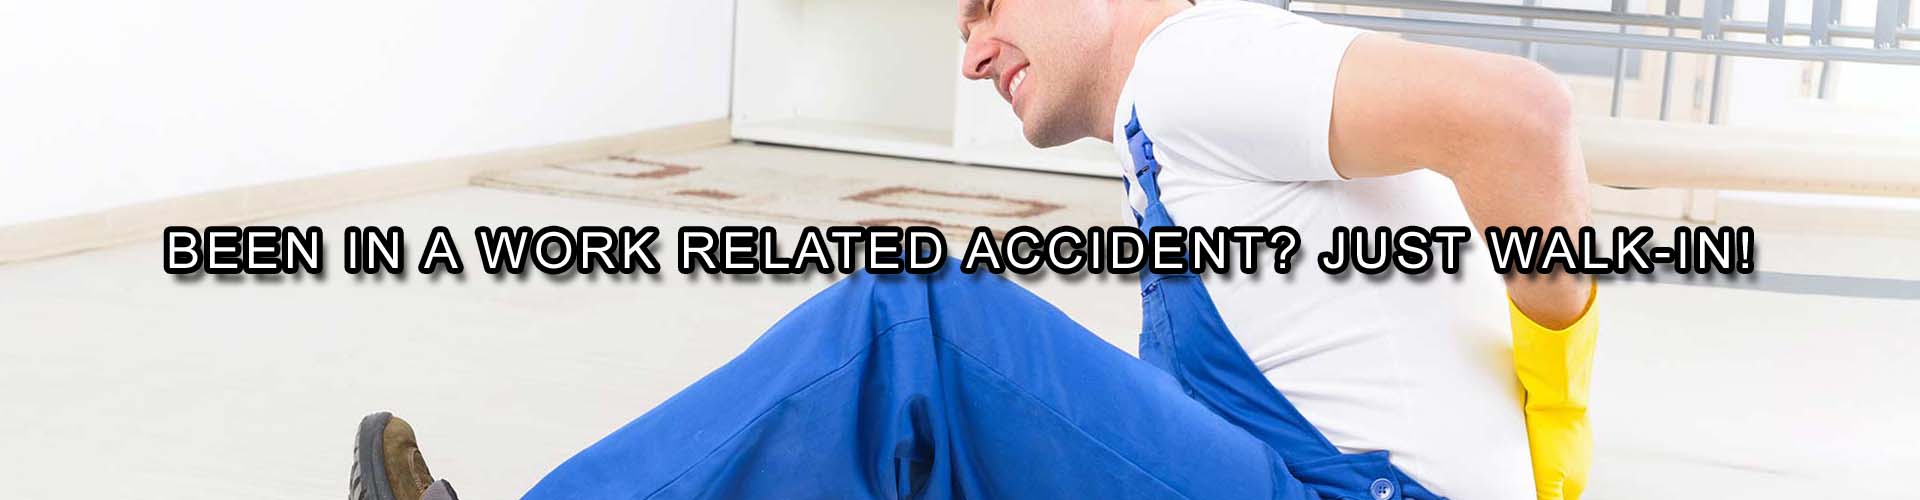 RC Walk-In for work related accidents.